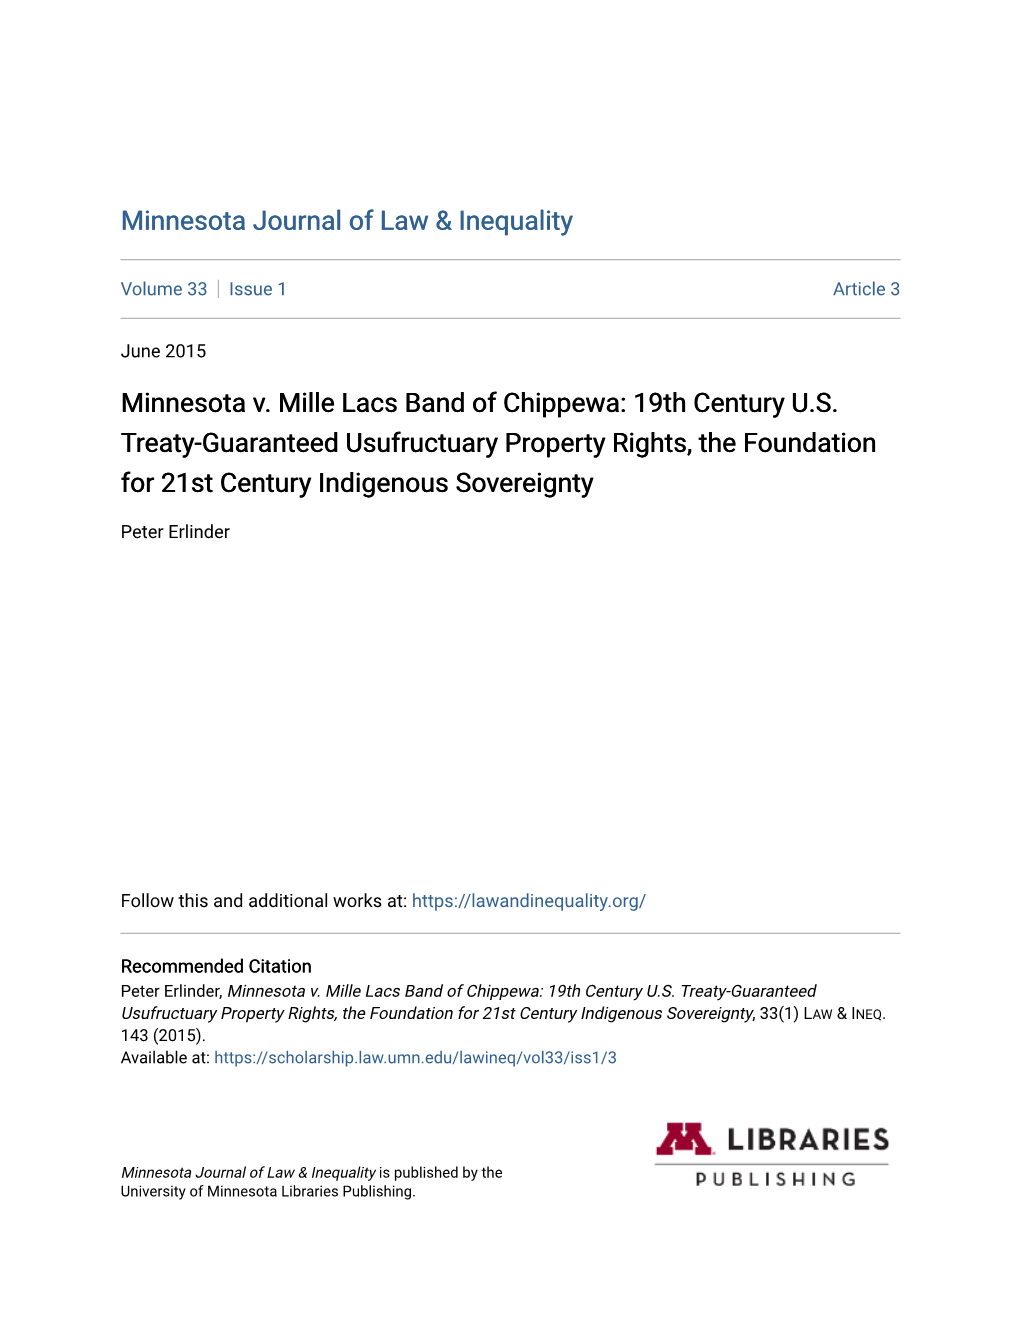 Minnesota V. Mille Lacs Band of Chippewa: 19Th Century U.S. Treaty-Guaranteed Usufructuary Property Rights, the Foundation for 21St Century Indigenous Sovereignty